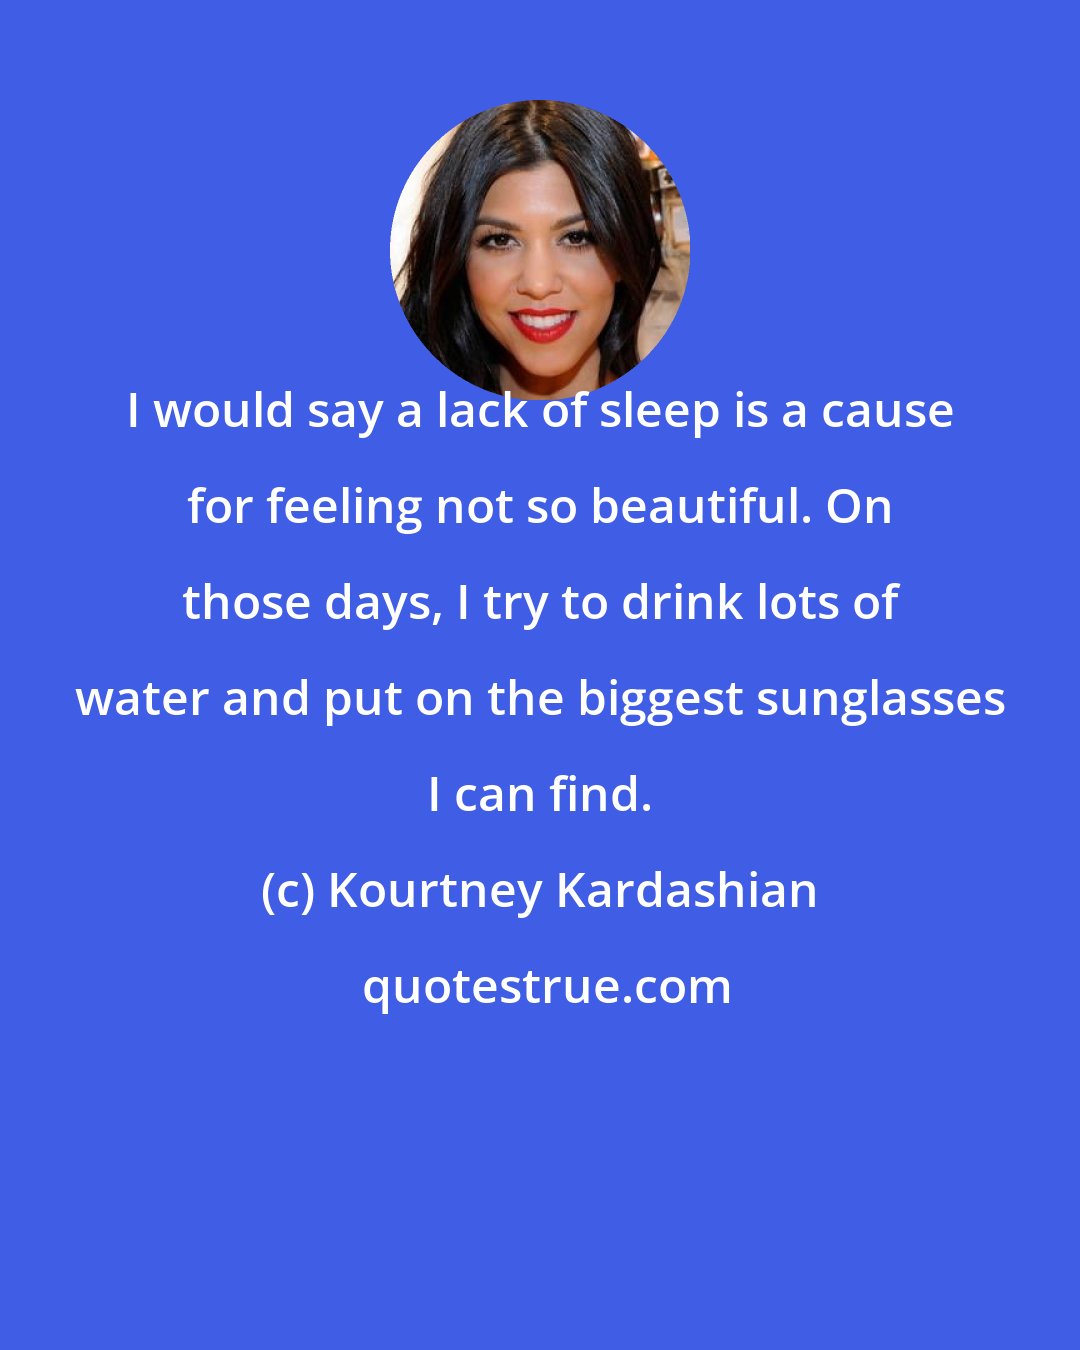 Kourtney Kardashian: I would say a lack of sleep is a cause for feeling not so beautiful. On those days, I try to drink lots of water and put on the biggest sunglasses I can find.